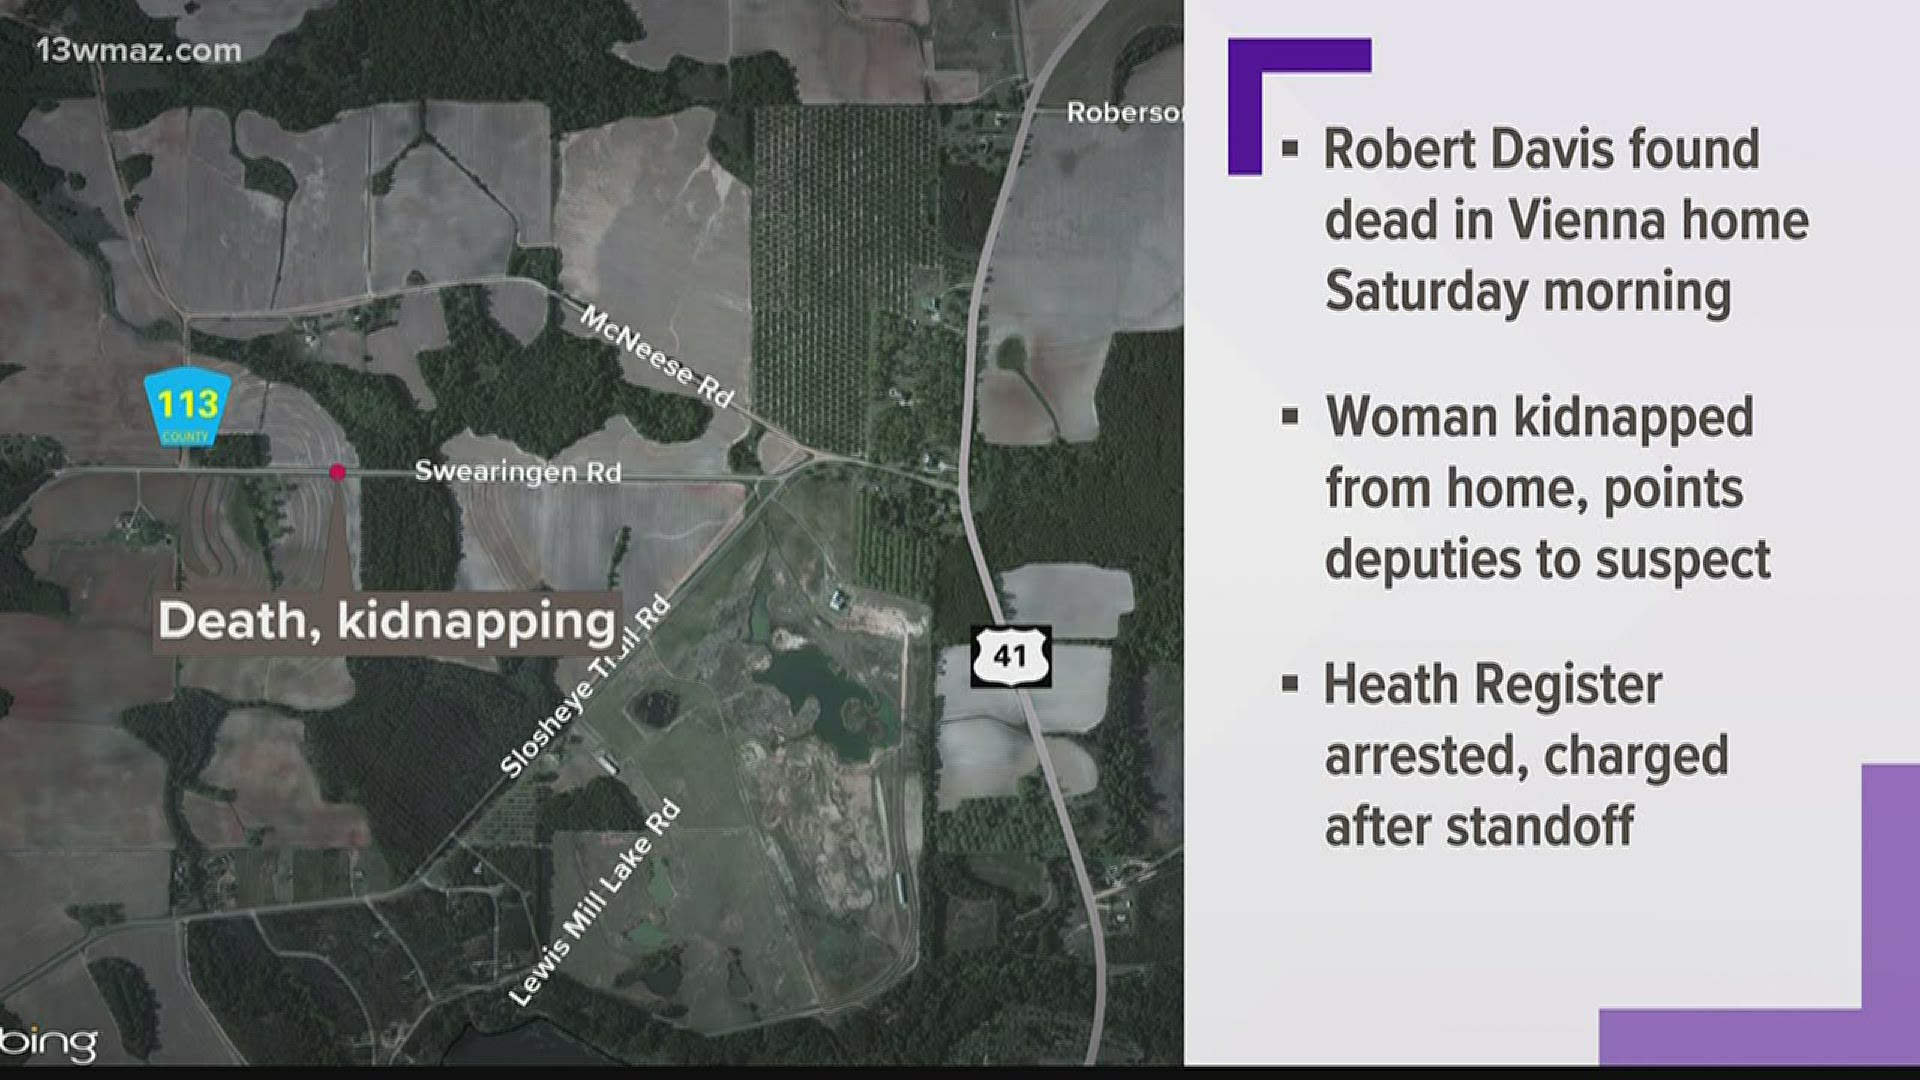 The release says a woman was kidnapped during the incident that lead to Robert Davis' death.